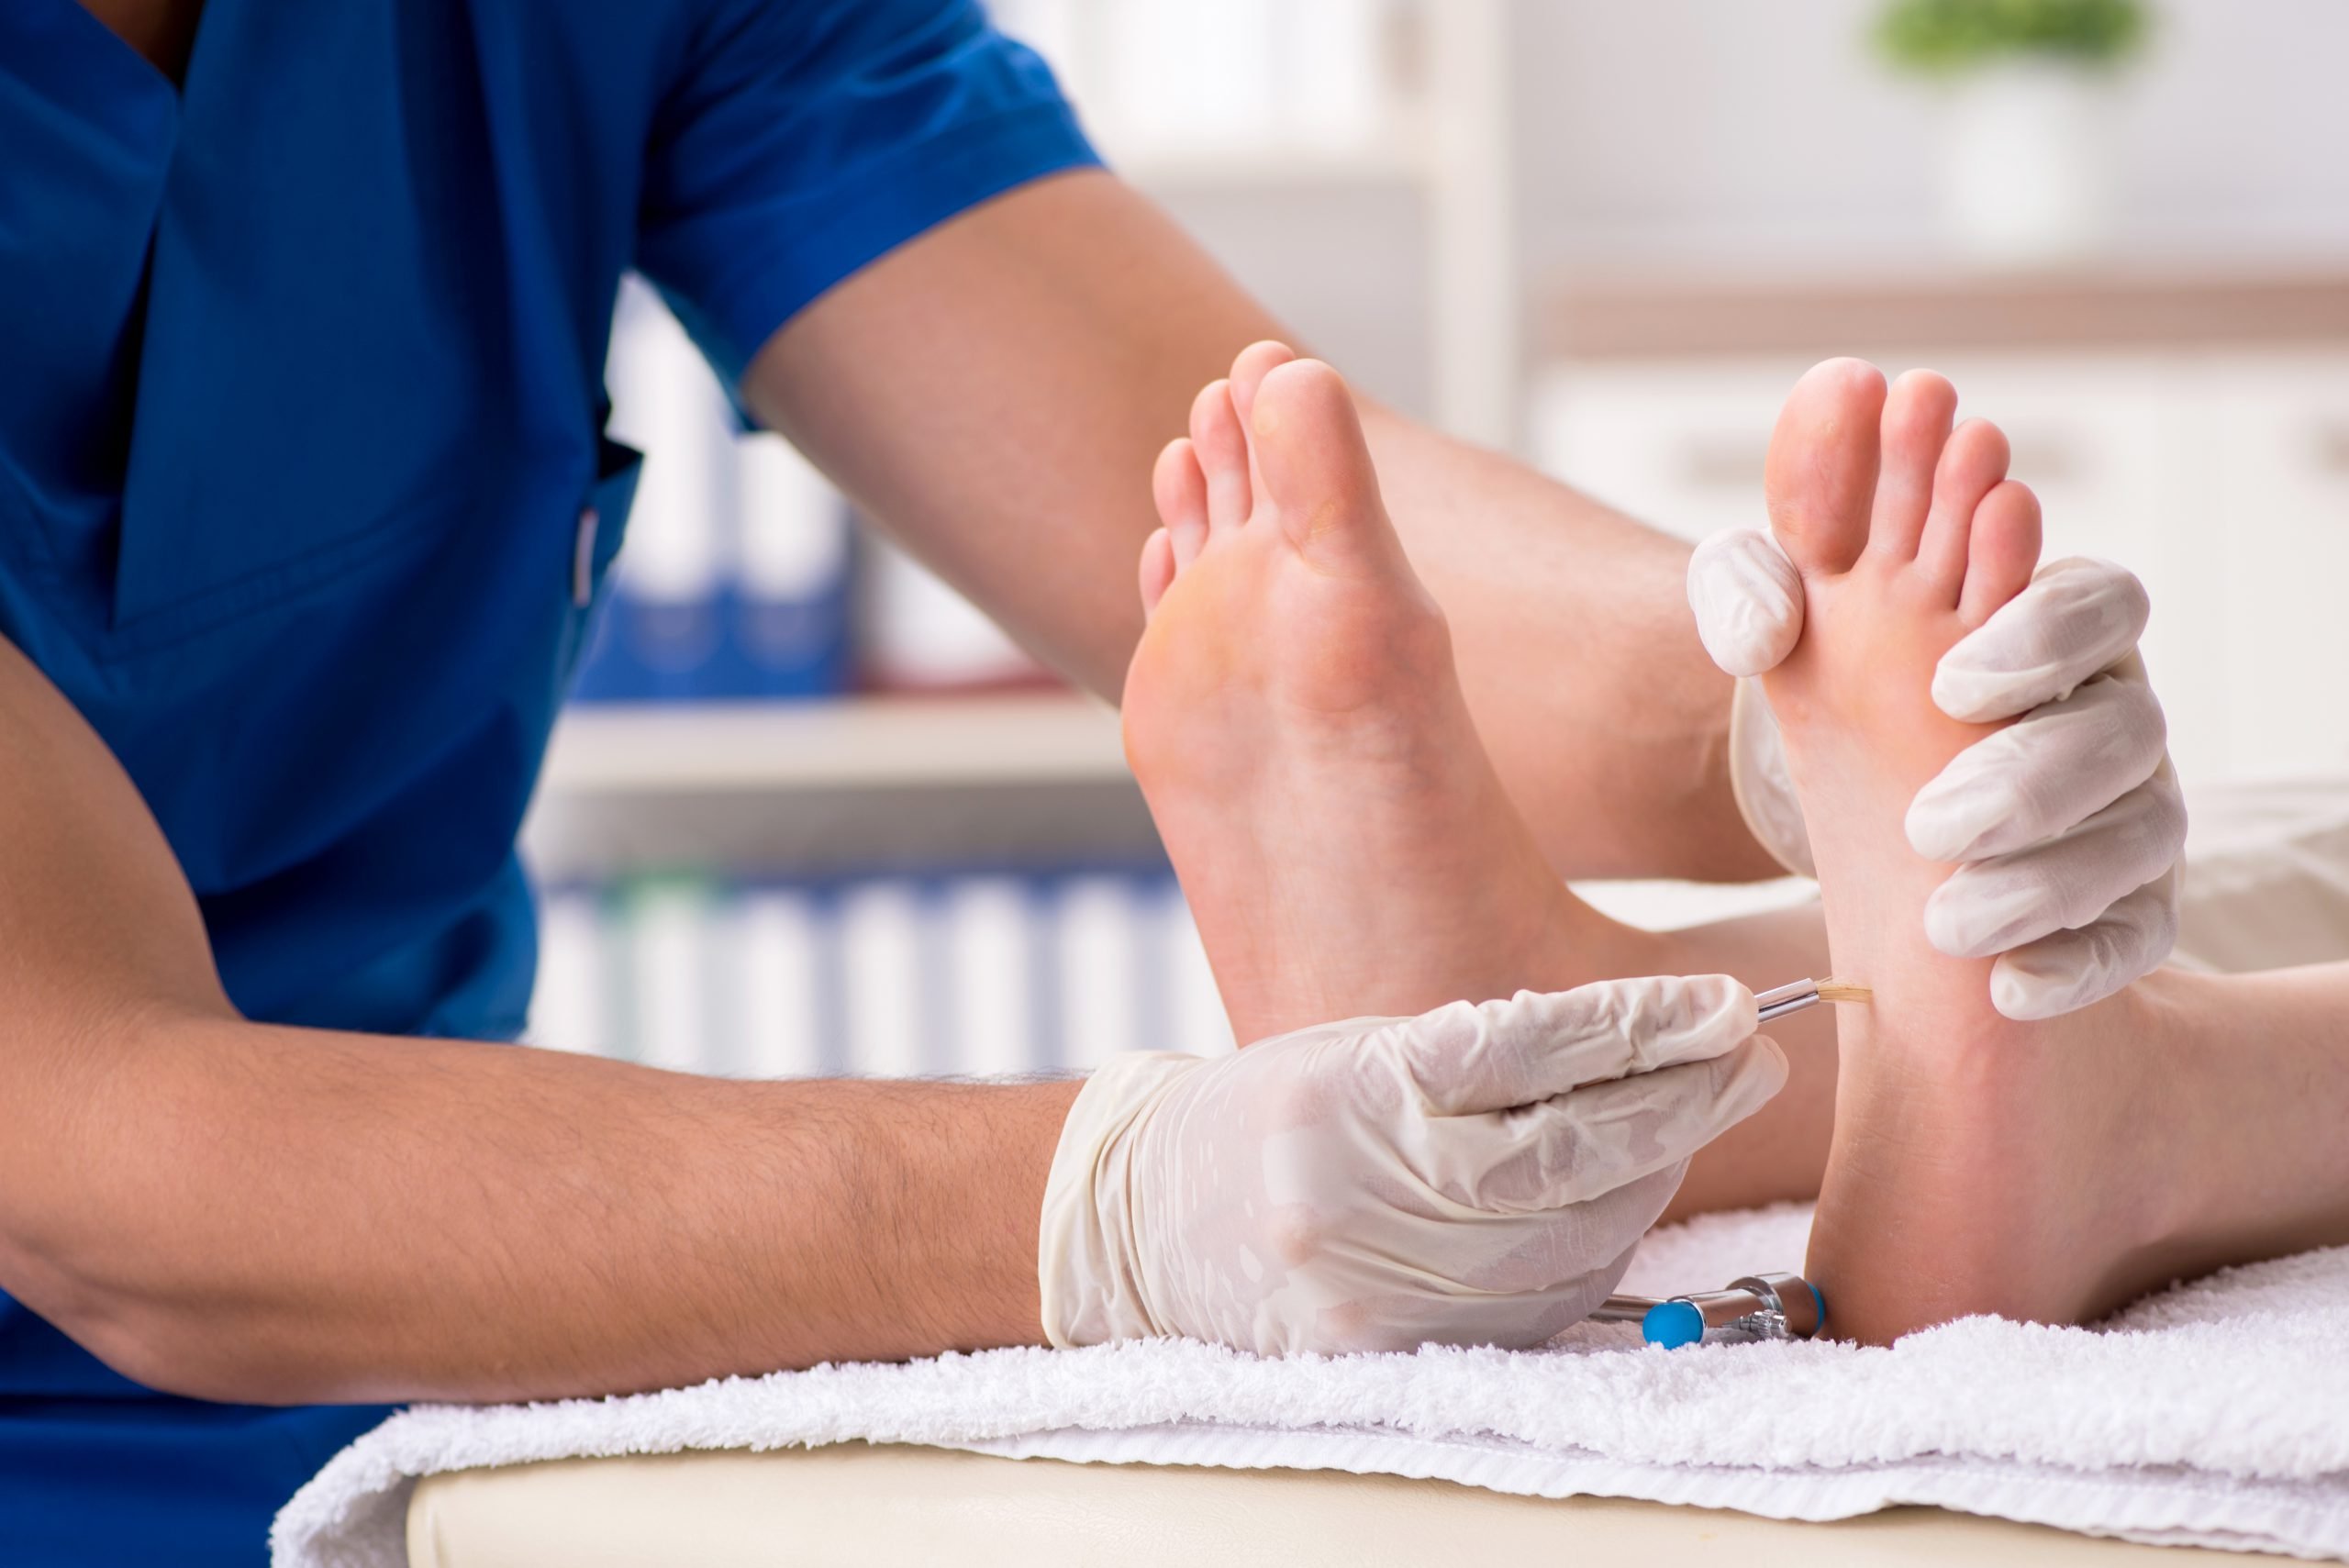 Routine Foot Care